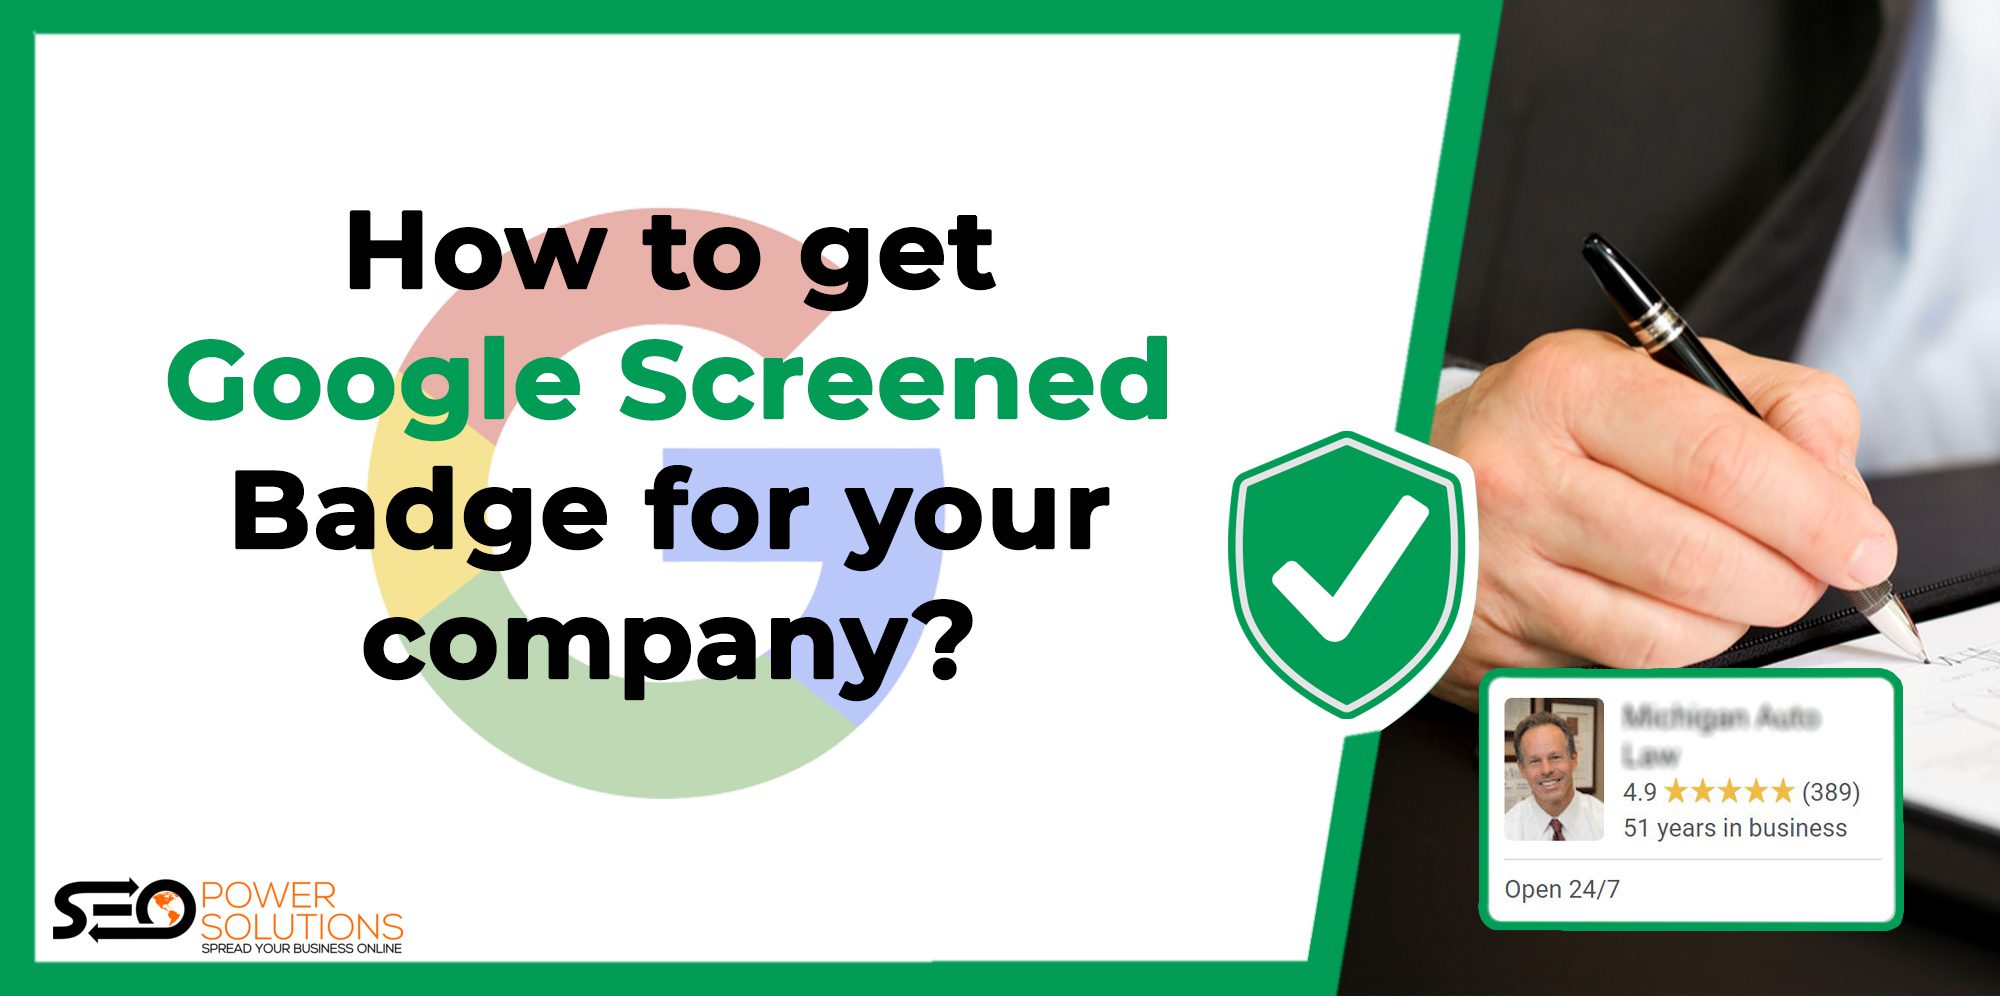 How to get Google Screened Badge for your company?